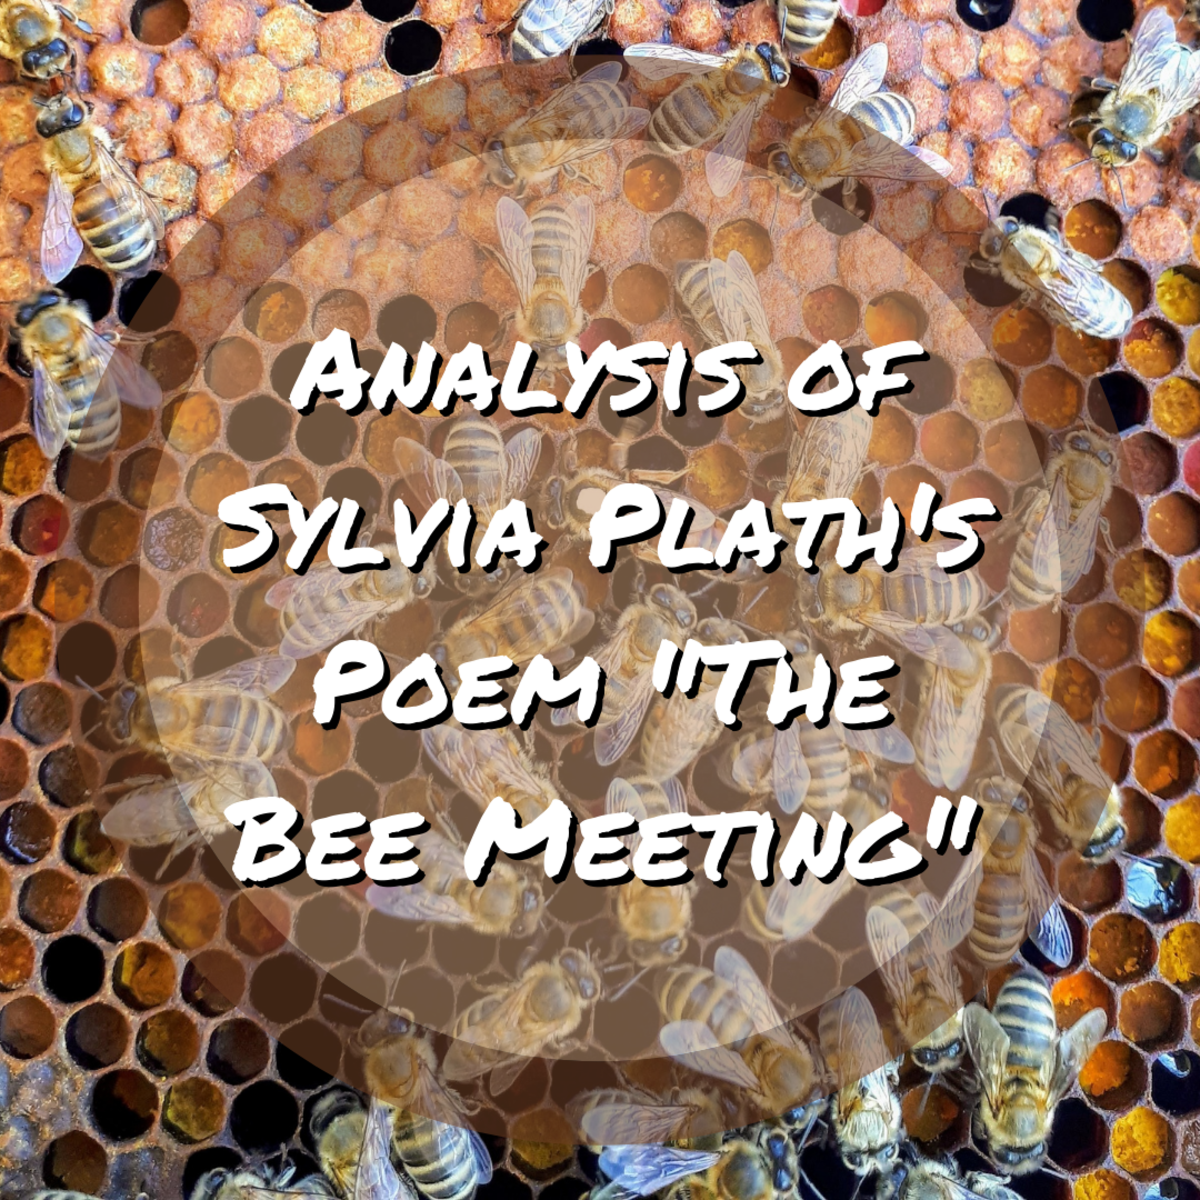 Analysis of Poem 'The Bee Meeting' by Sylvia Plath